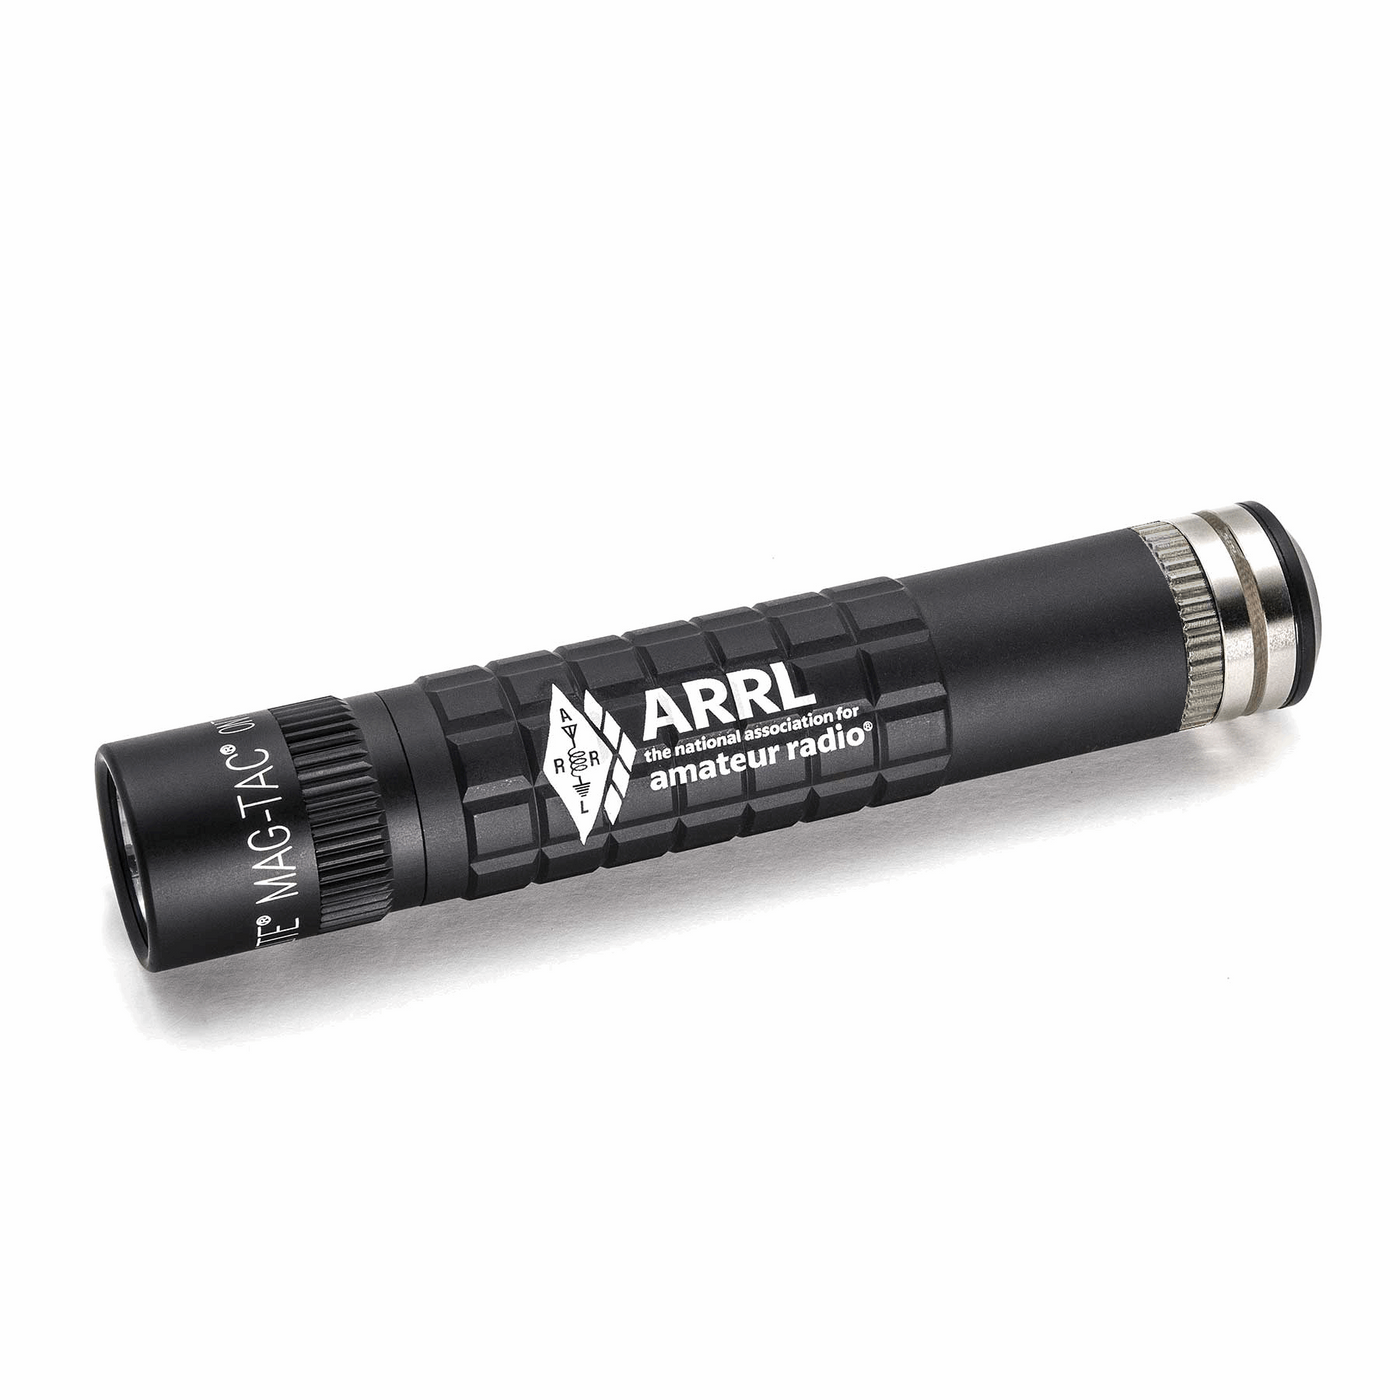 The Maglite MAG-TAC LED Rechargeable Flashlight with special engraving